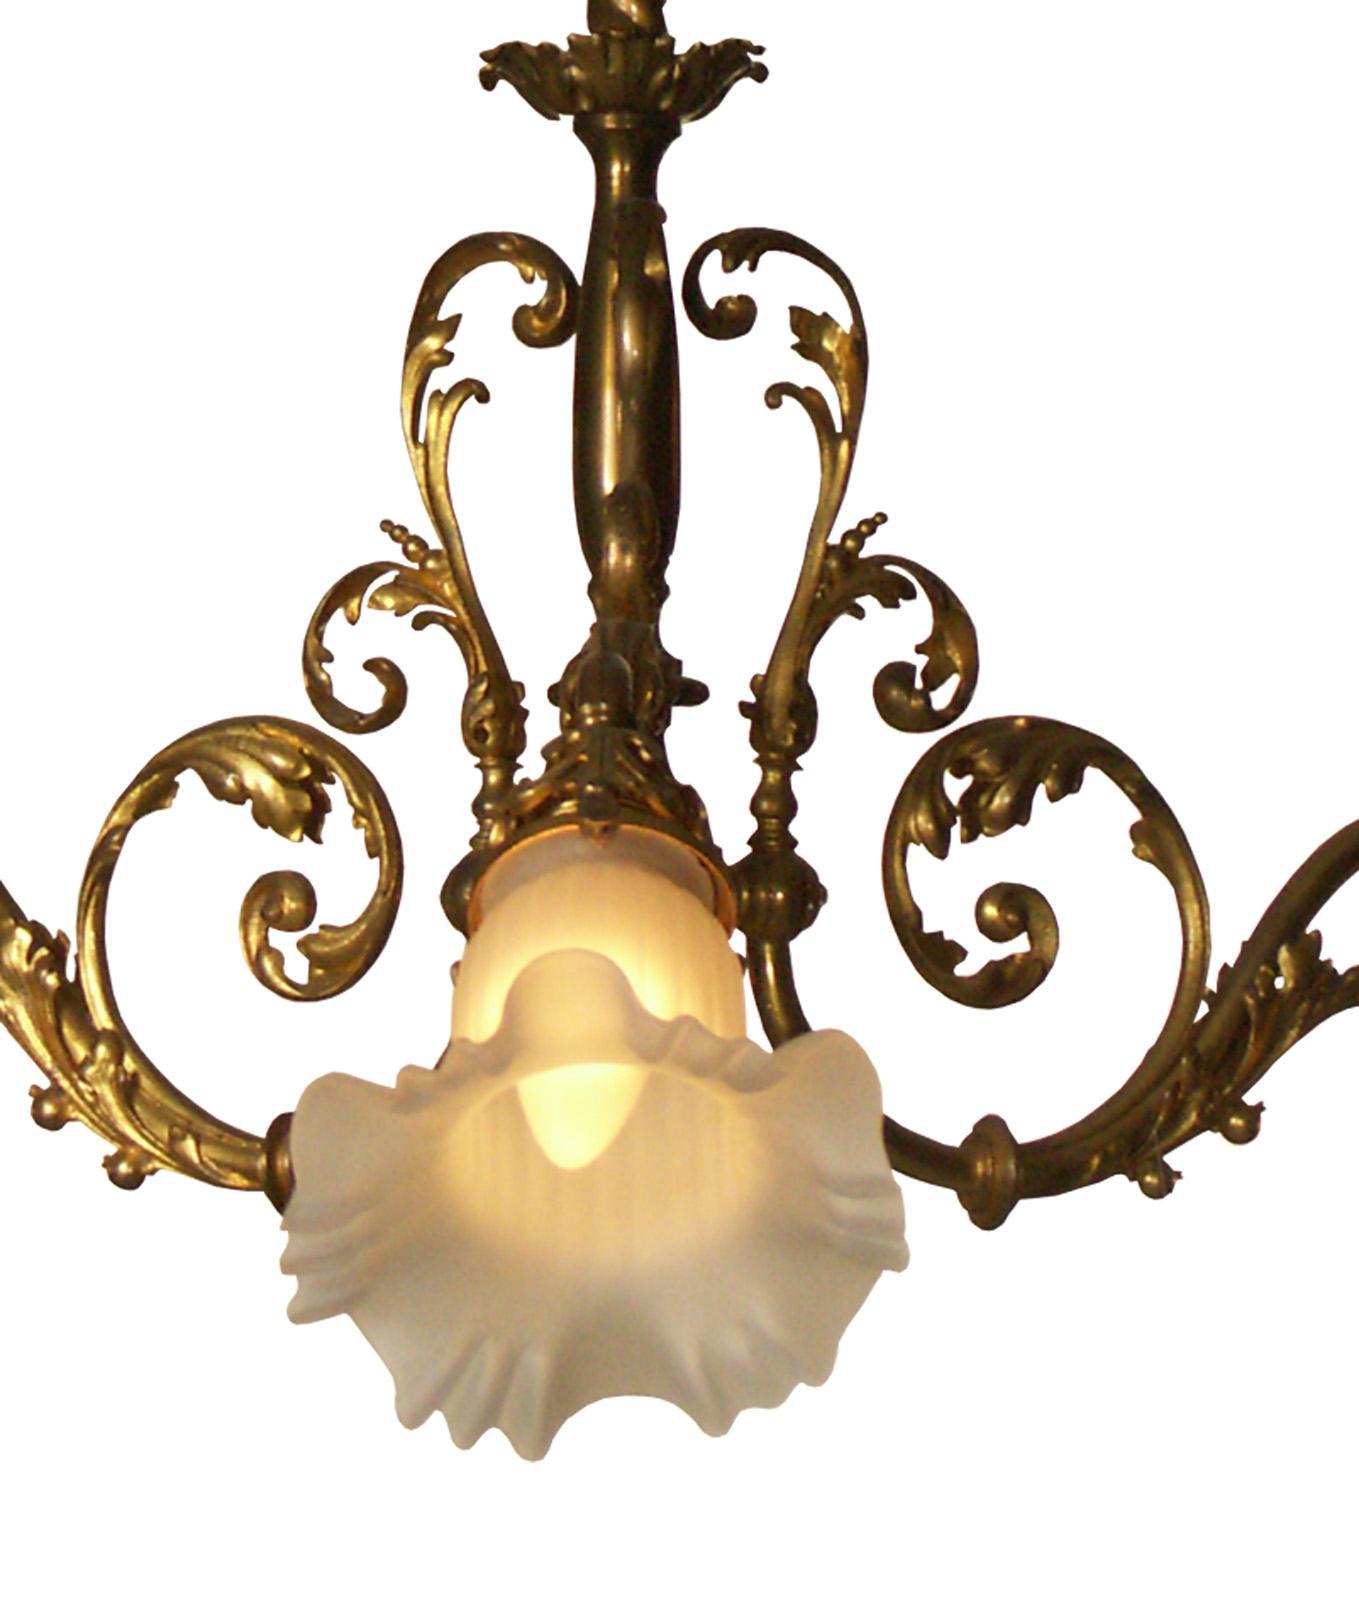 Around 1900 in Vienna the private houses were connected to the electricity grid. At that time the common gaslights were changed to the new technology. As well new chandelier were built for electric light only. This typical Viennese chandelier has